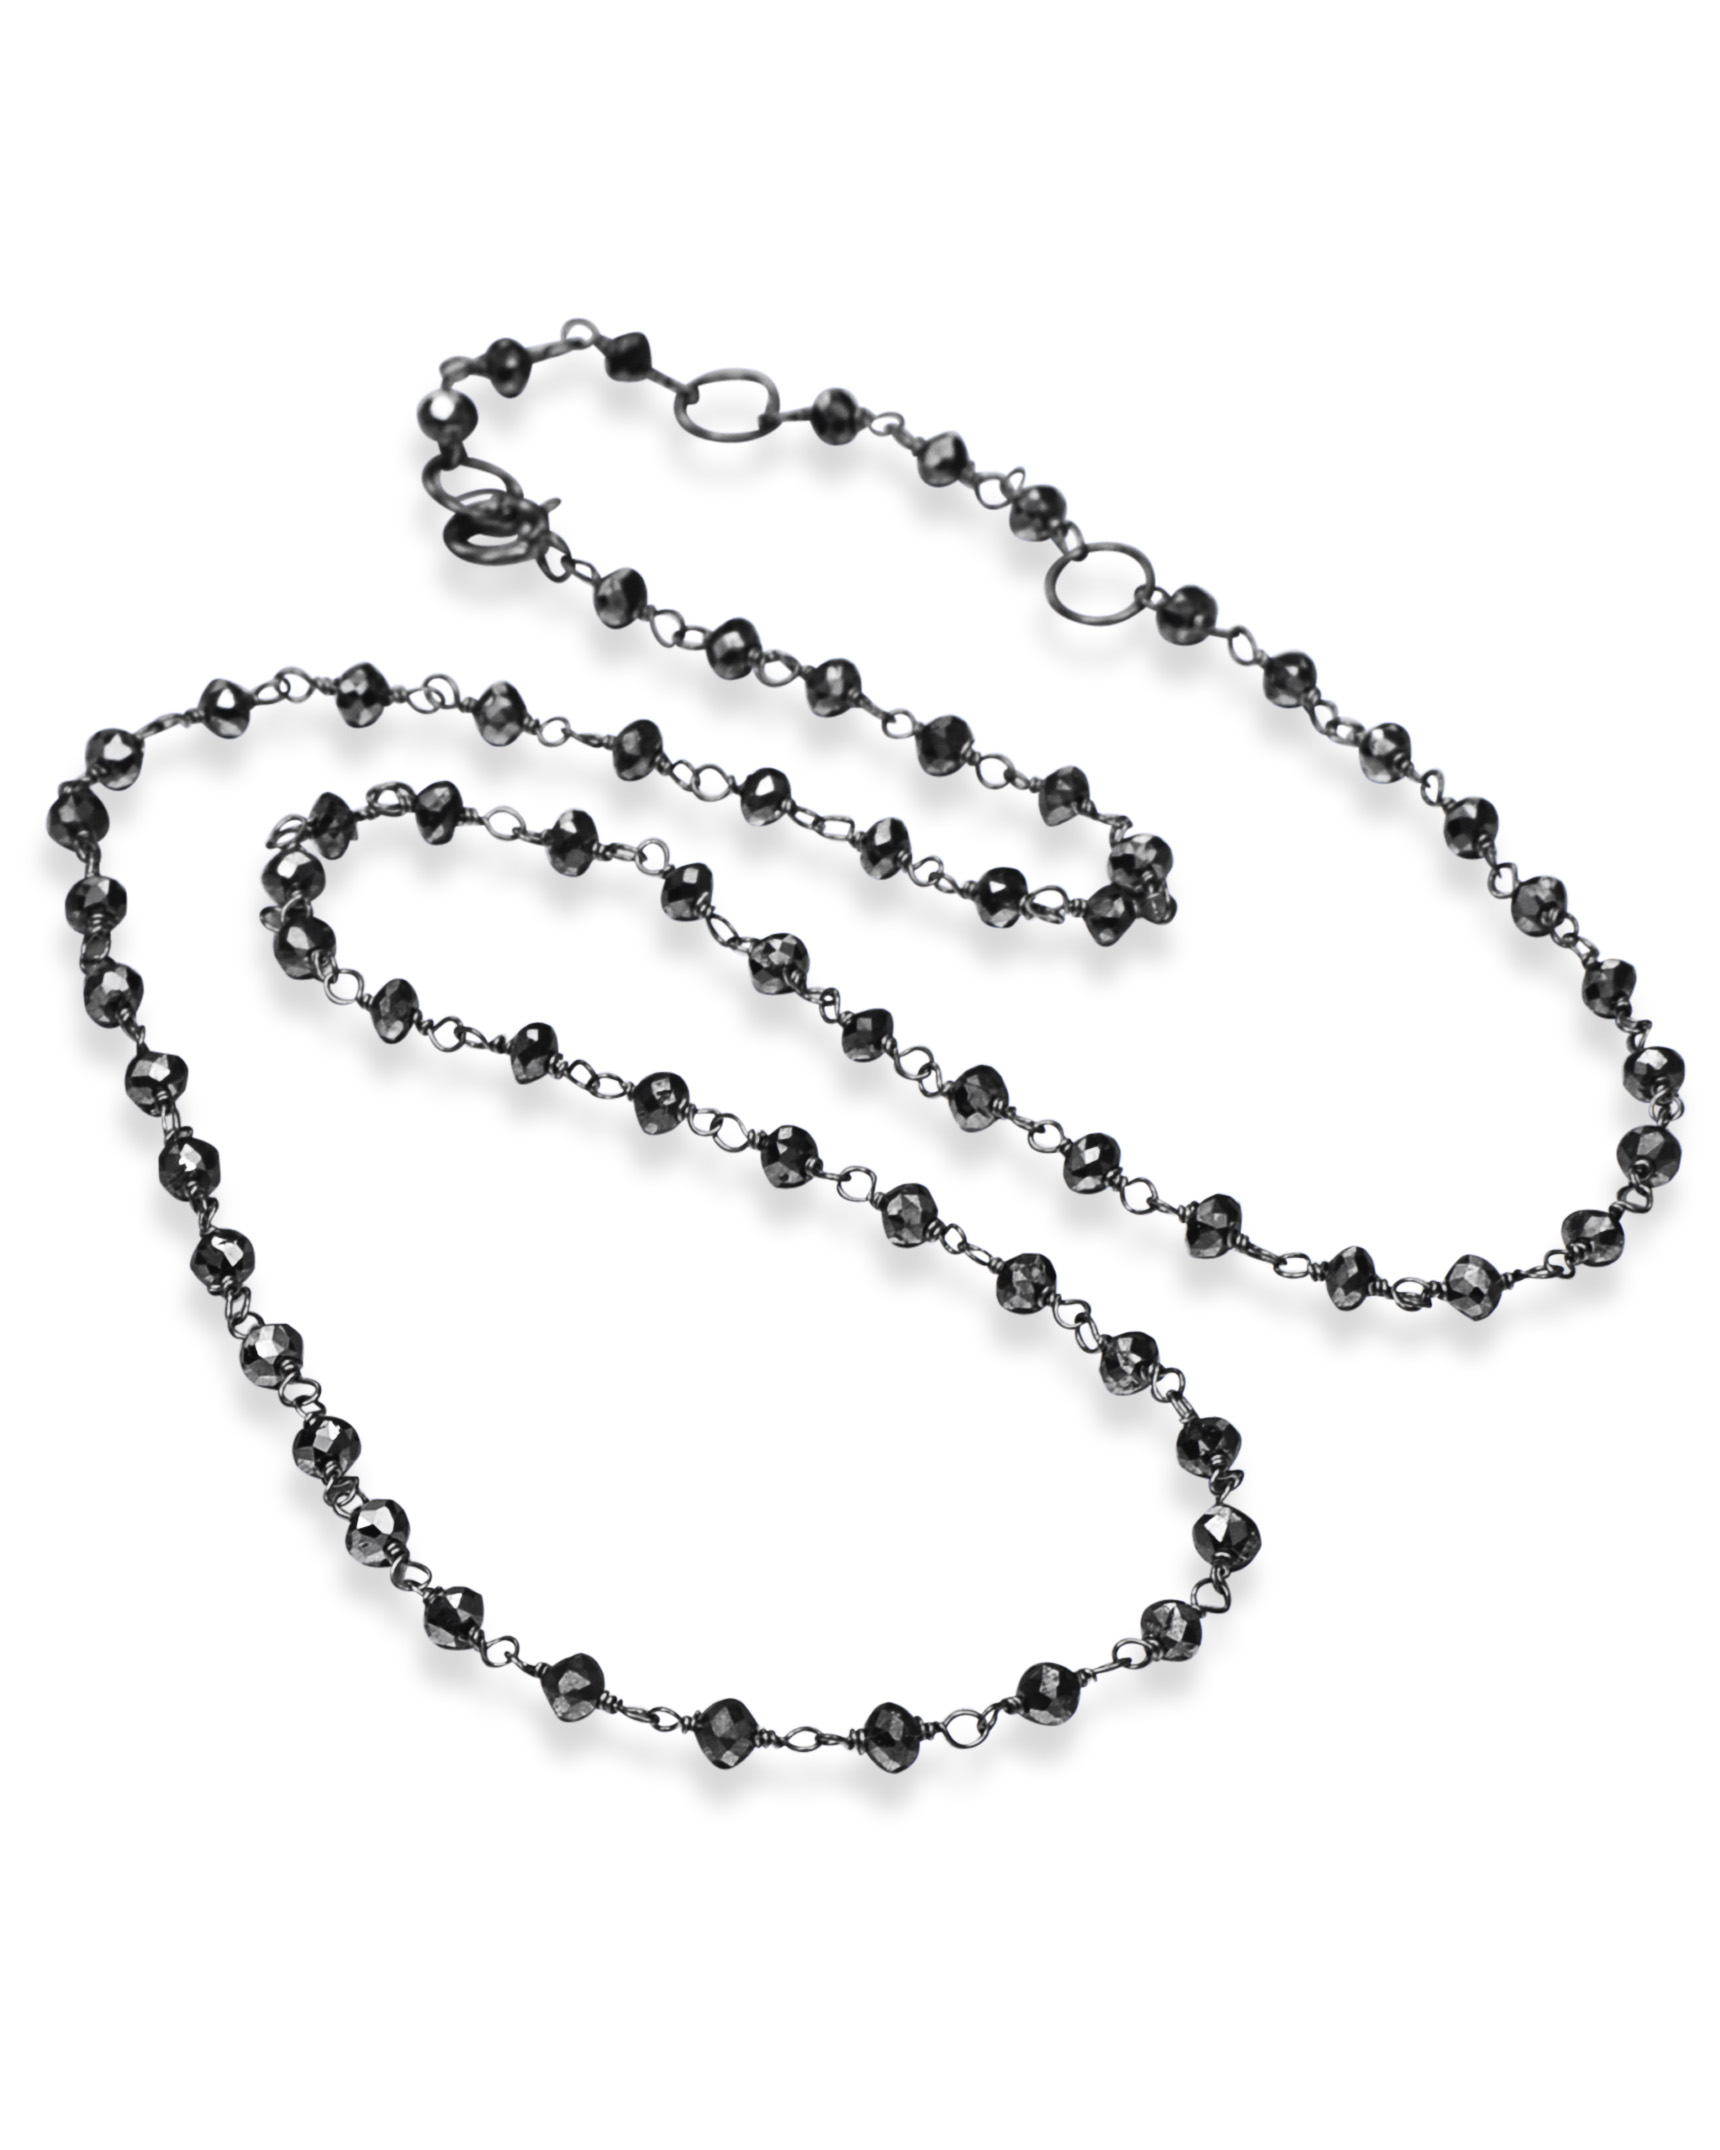 4 mm 20 Inches Black Diamond Beads Necklace Quality AAA Certified-Birthday  Gift | eBay